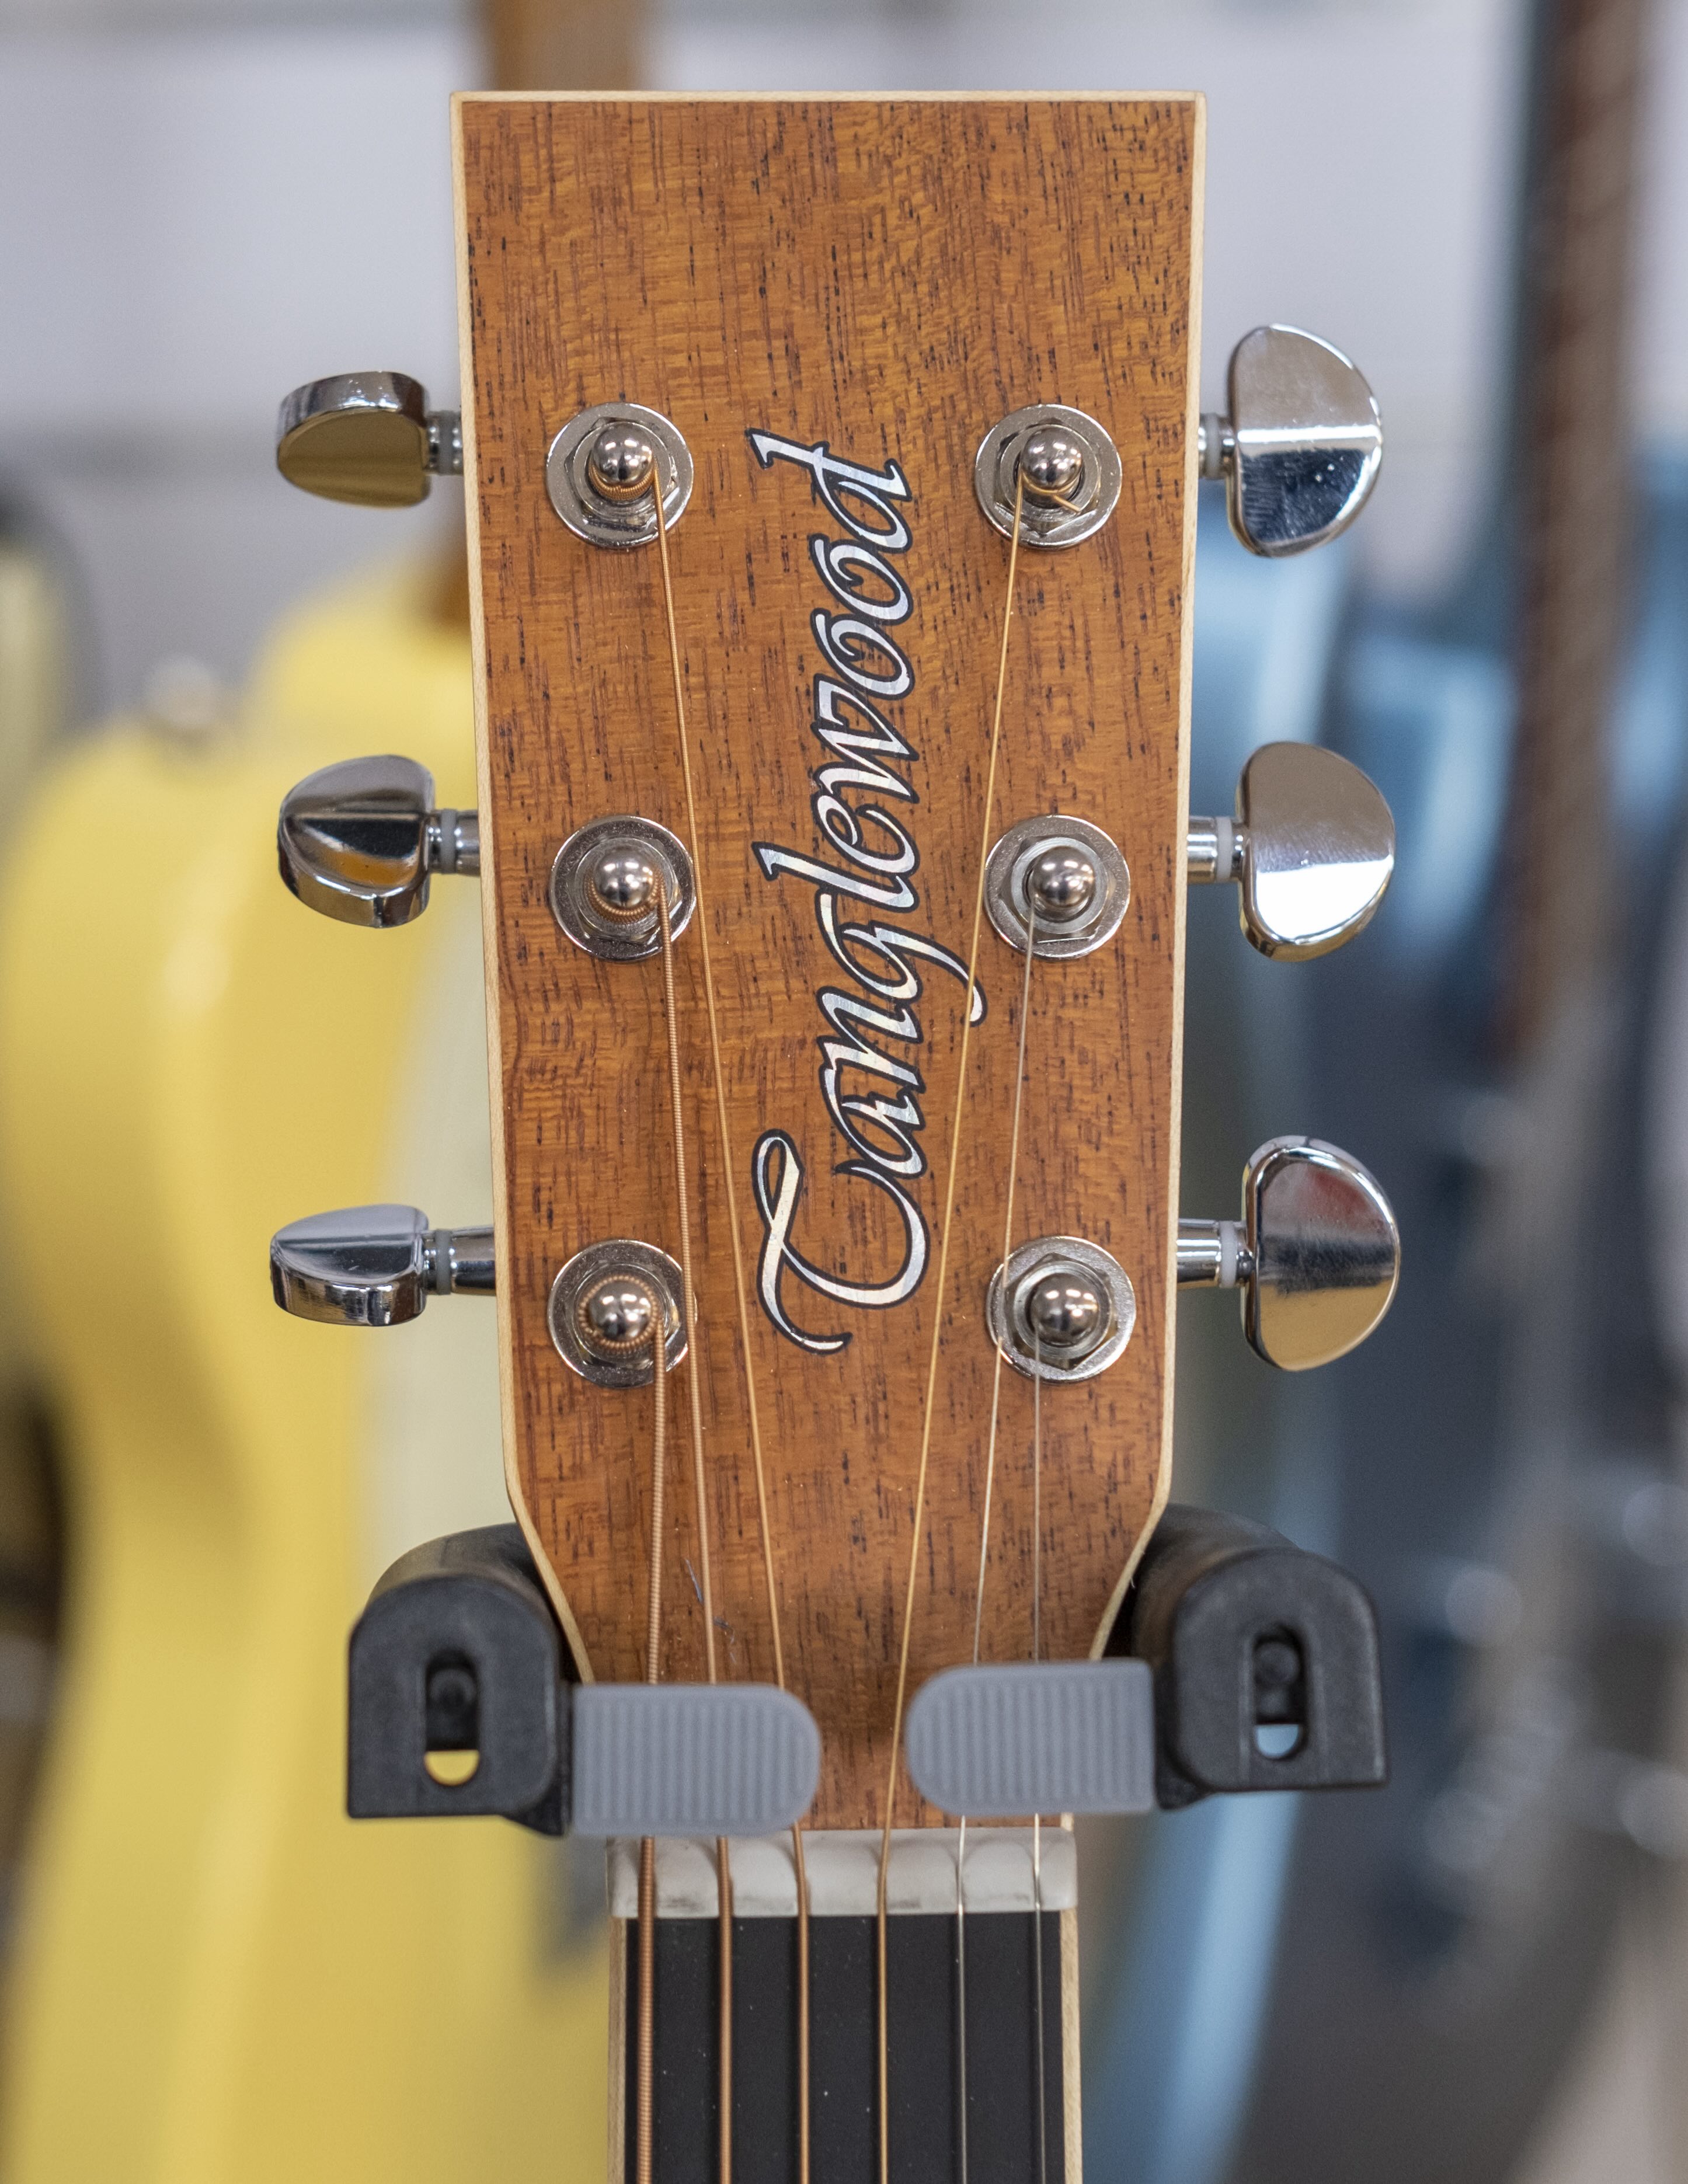 Tanglewood Union Series Dreadnought Acoustic Electric Guitar